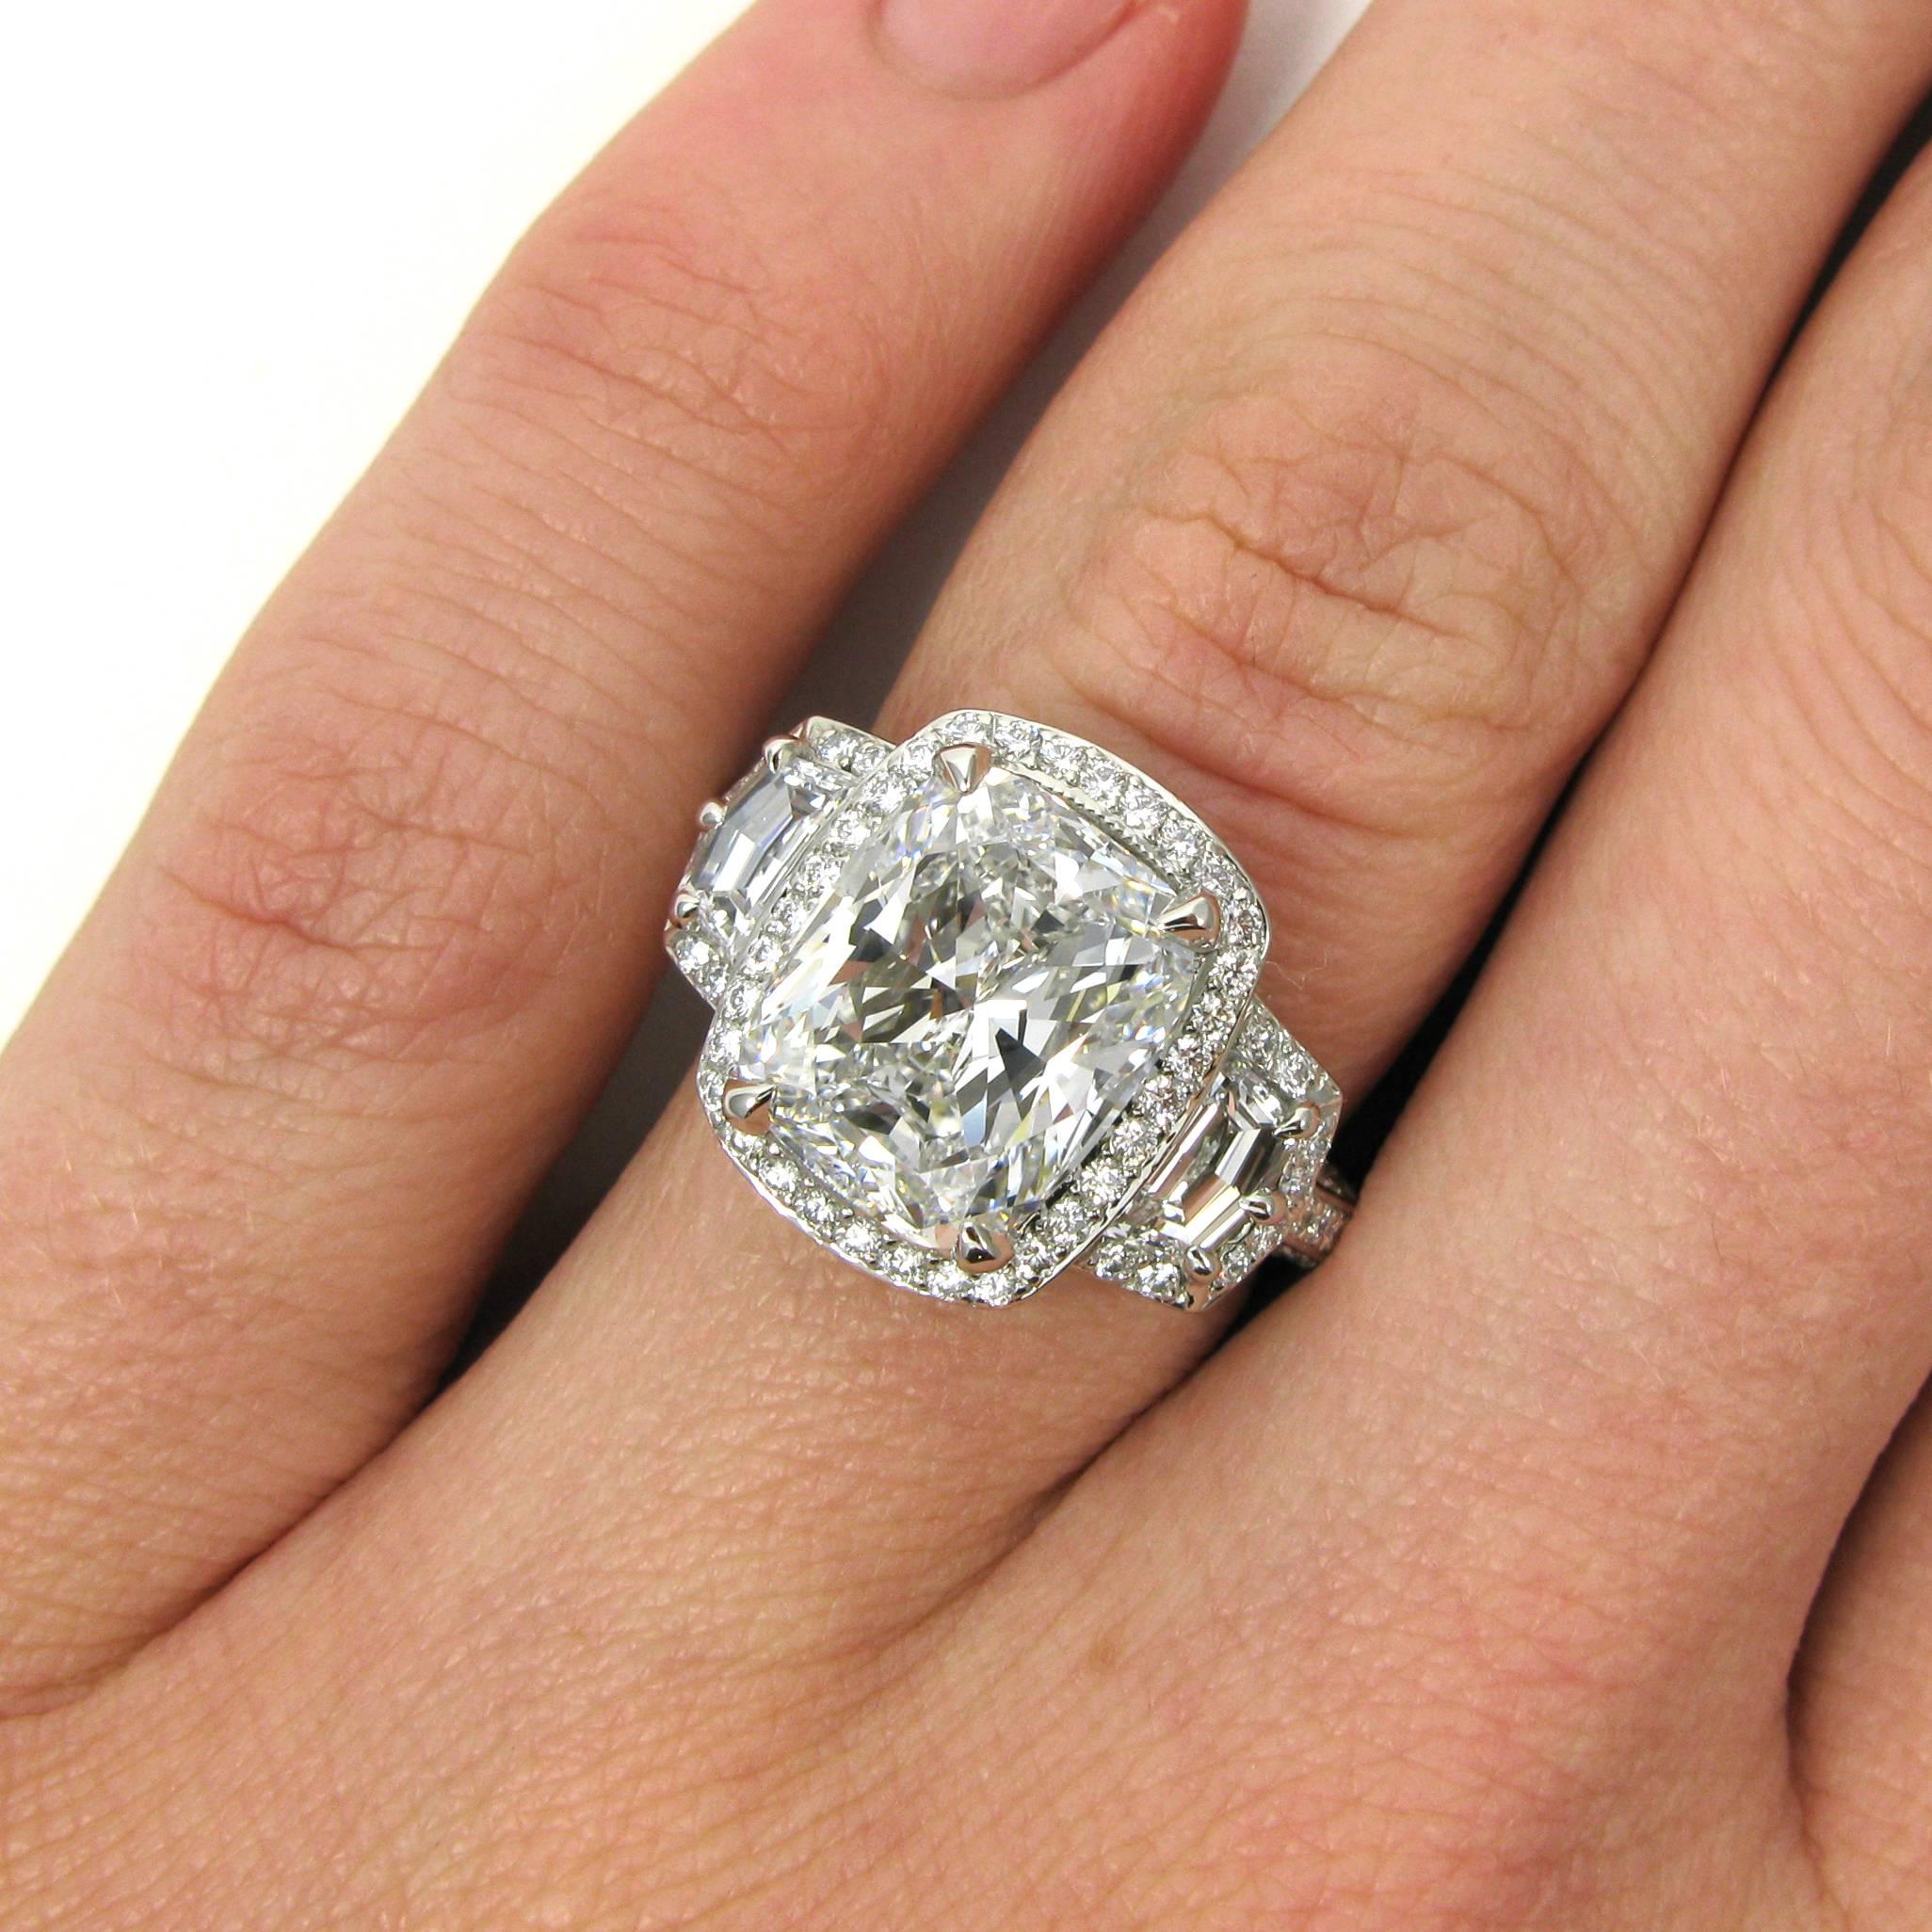 A beautiful 5.00 carat cushion cut diamond with E color and VS1 clarity is set into an impressive platinum three stone frame mounting. The cushion is flanked by two epaulet-cut diamonds totaling 0.44 carat while the entire ring is studded with round